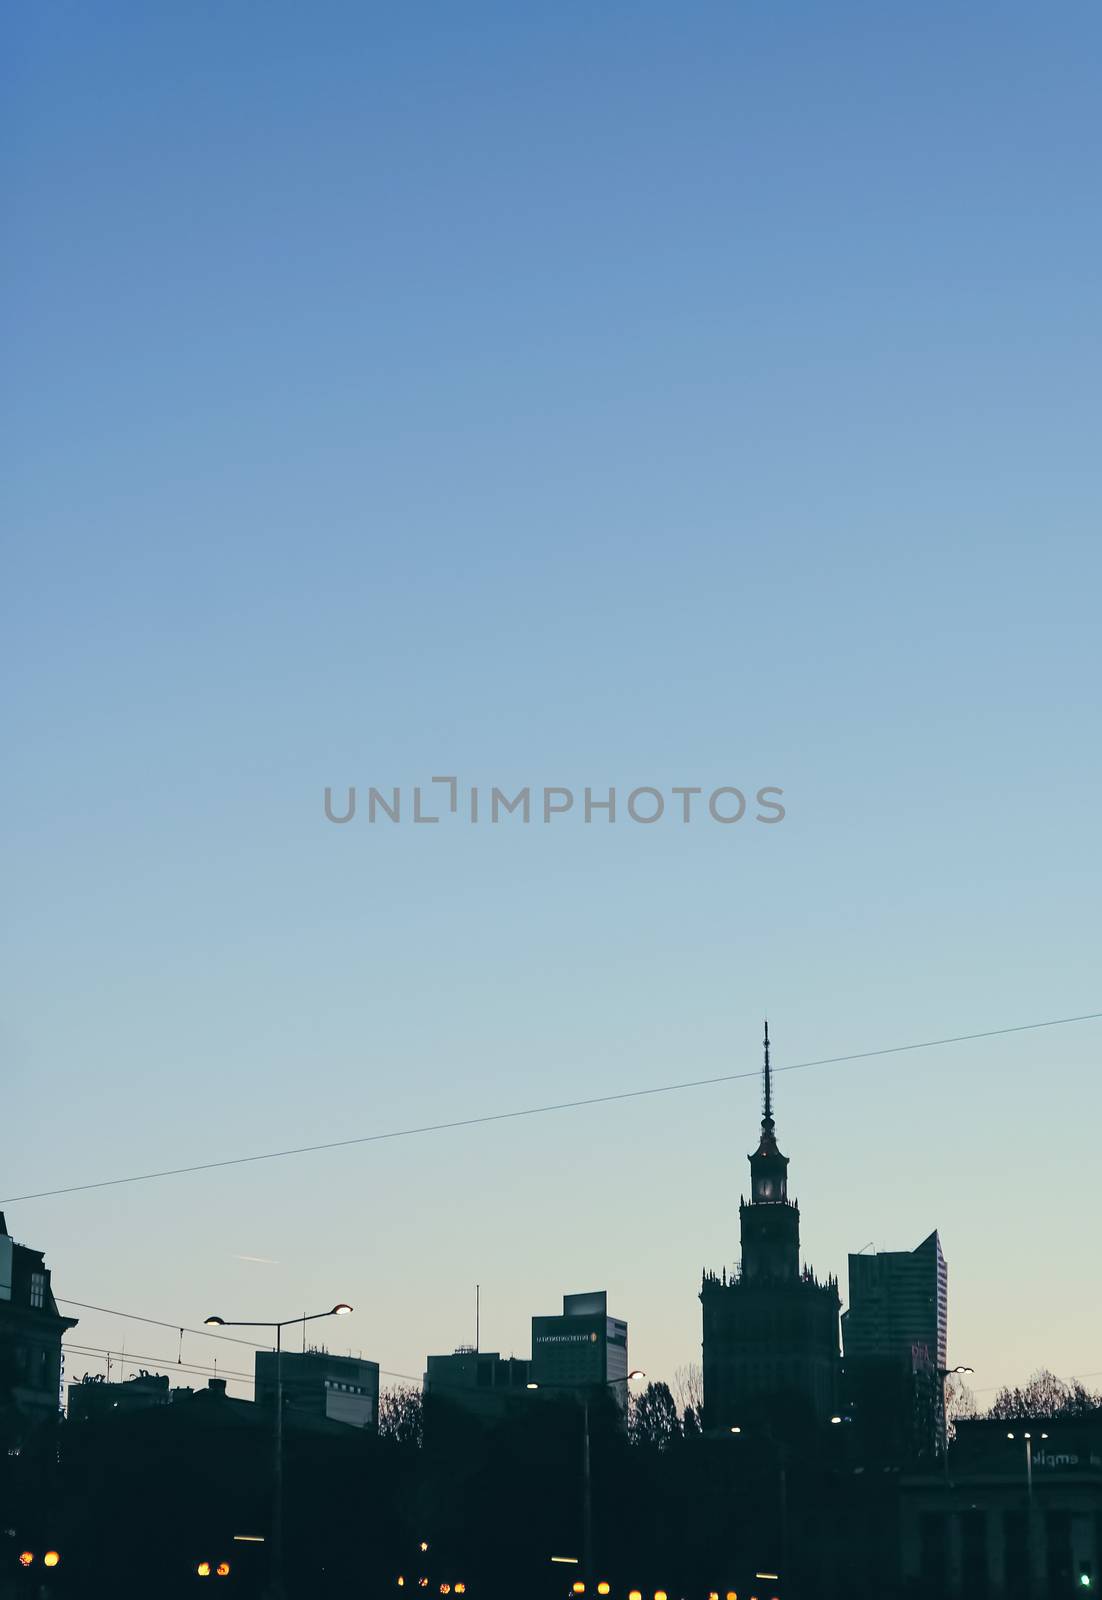 Cityscape silhouette of a European city as background, evening view by Anneleven